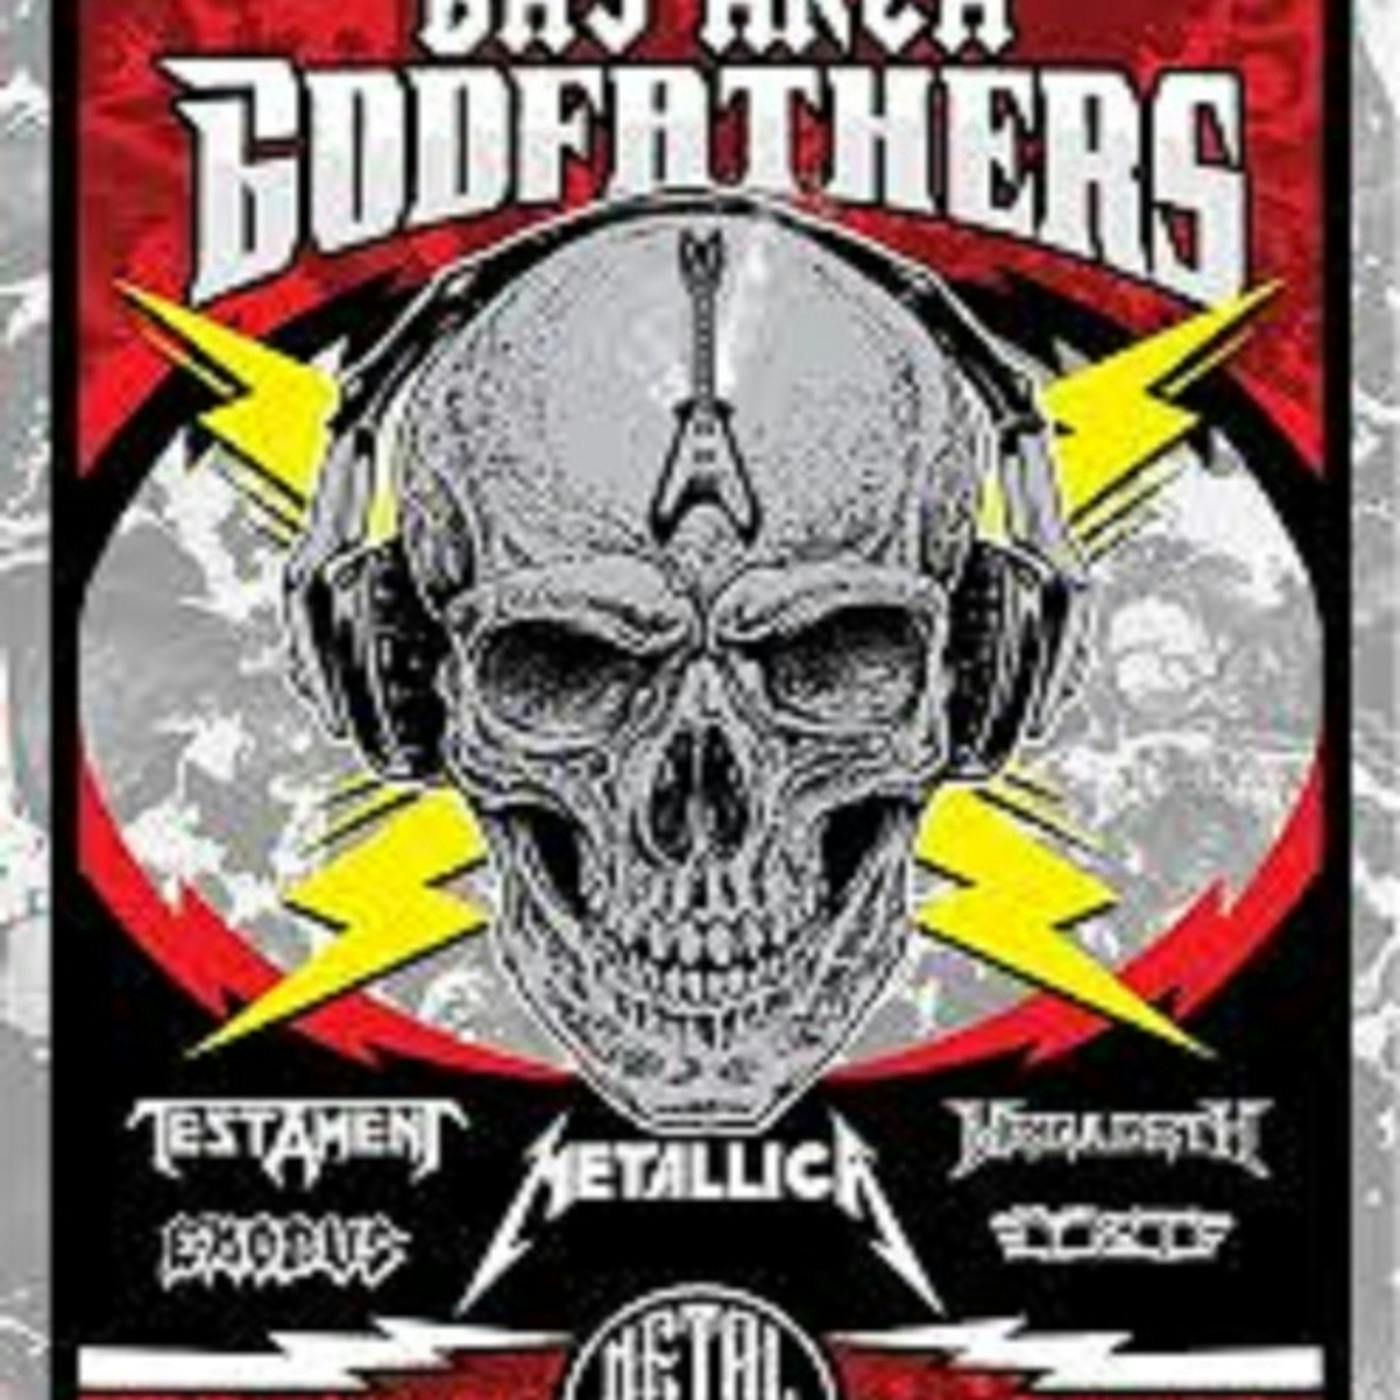 Streaming For Vengence & Bay Area Godfathers Interview